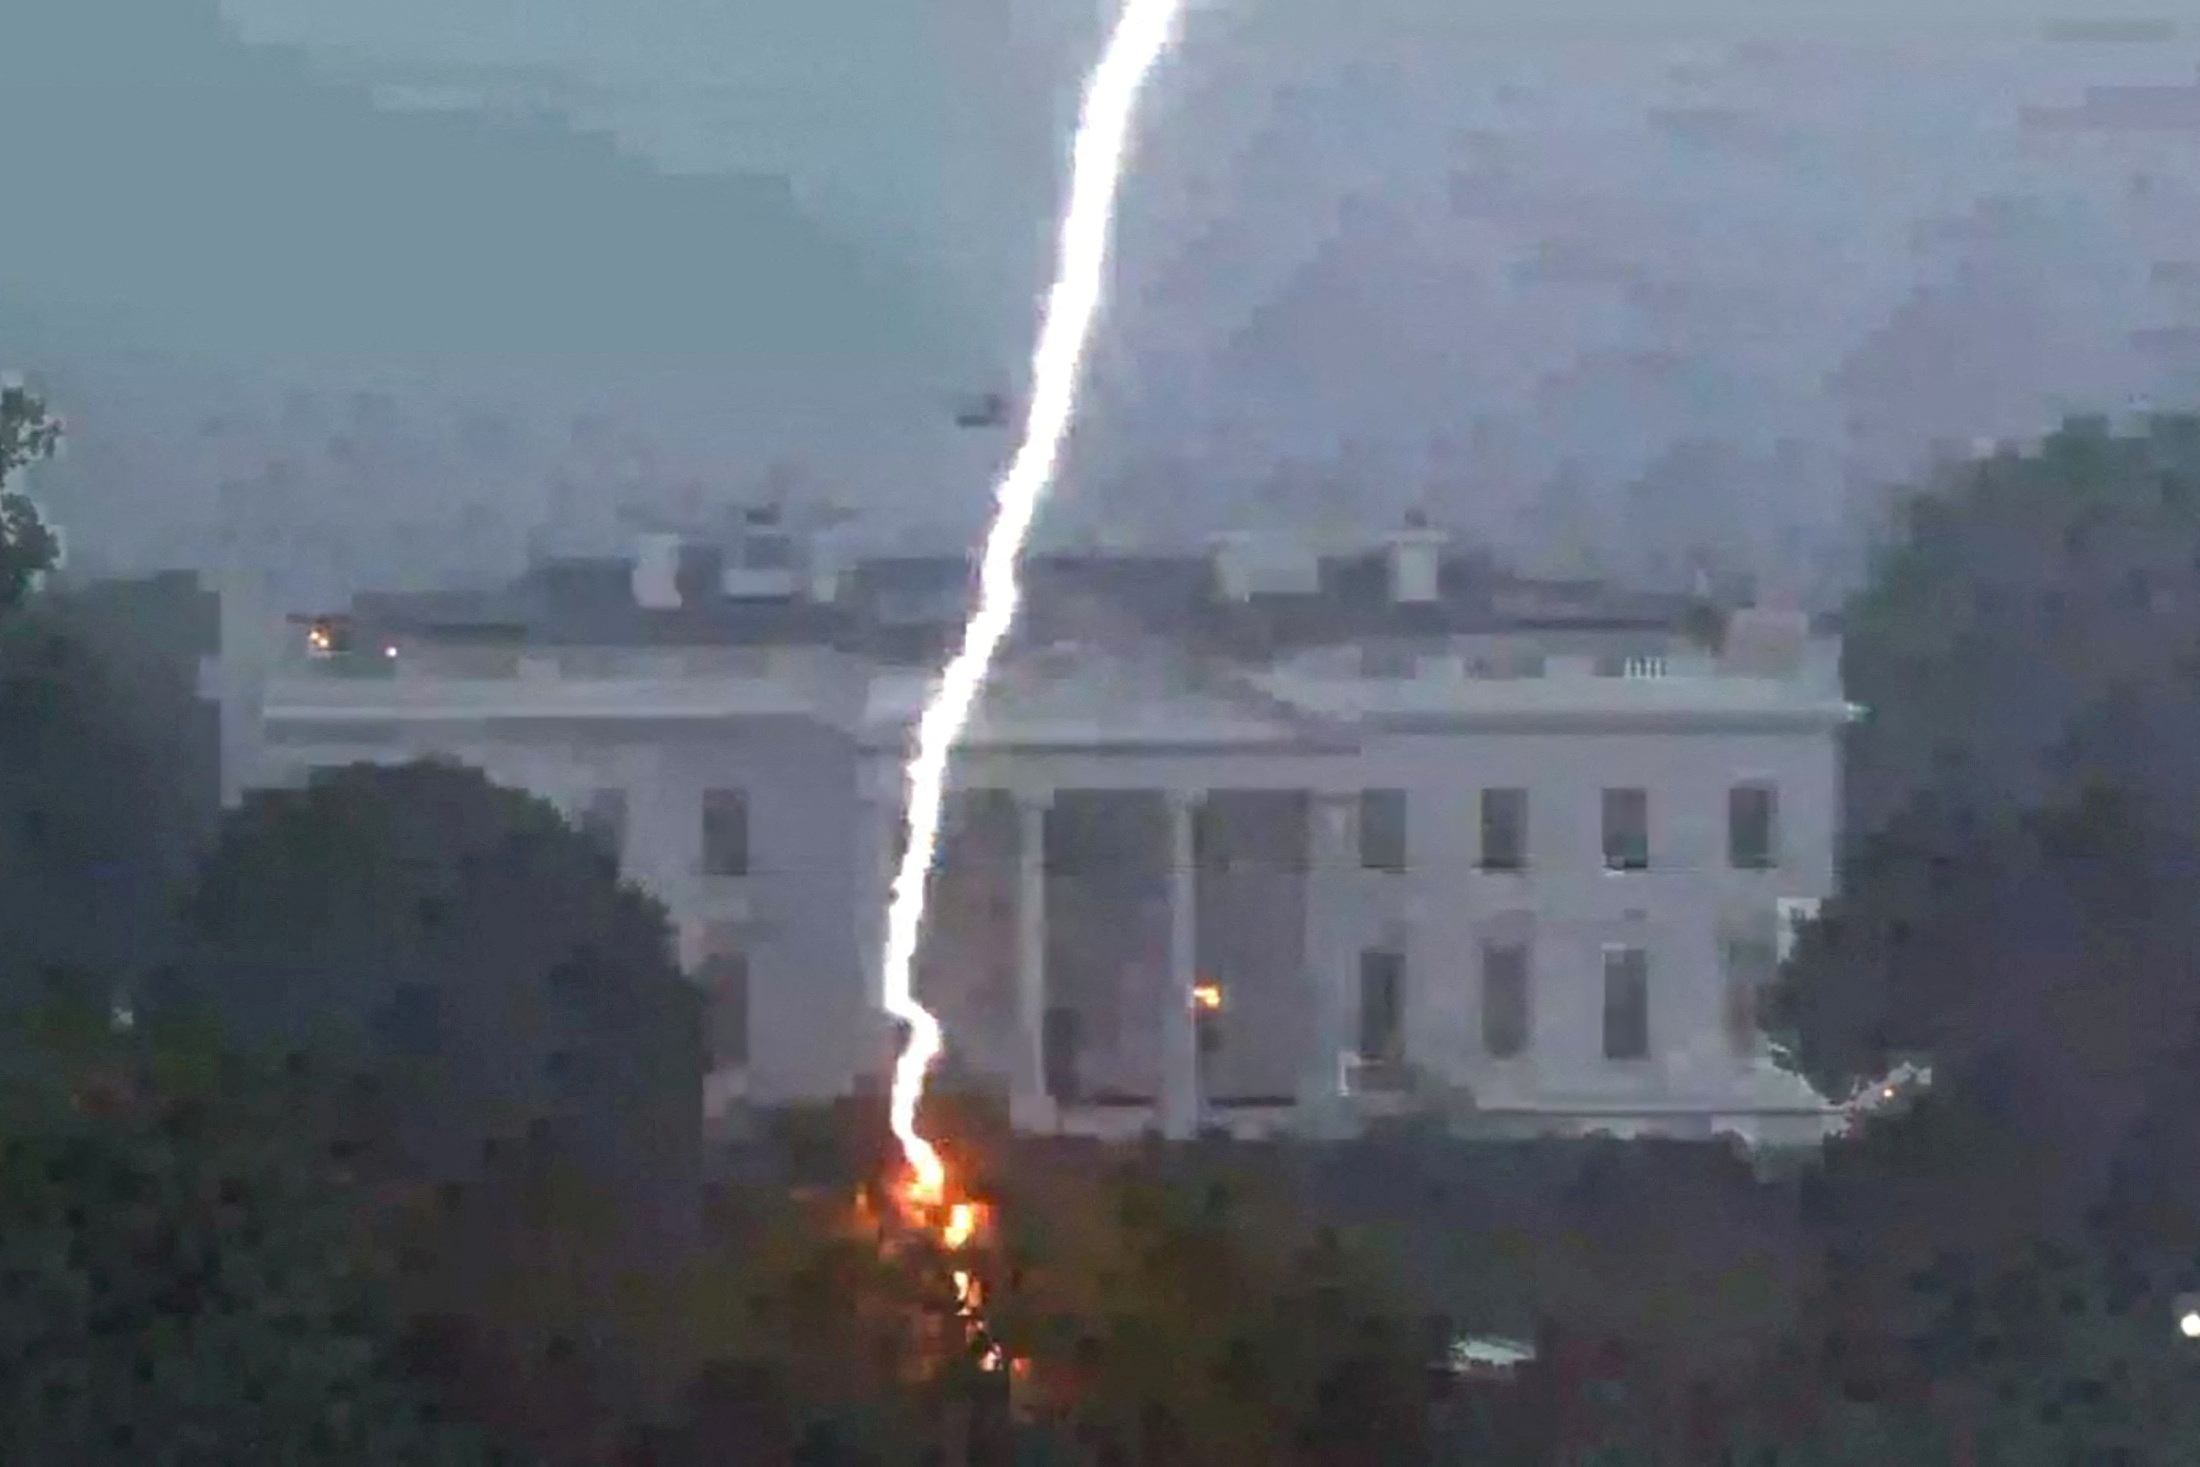 Three of the people who were injured by lightning near the White House died